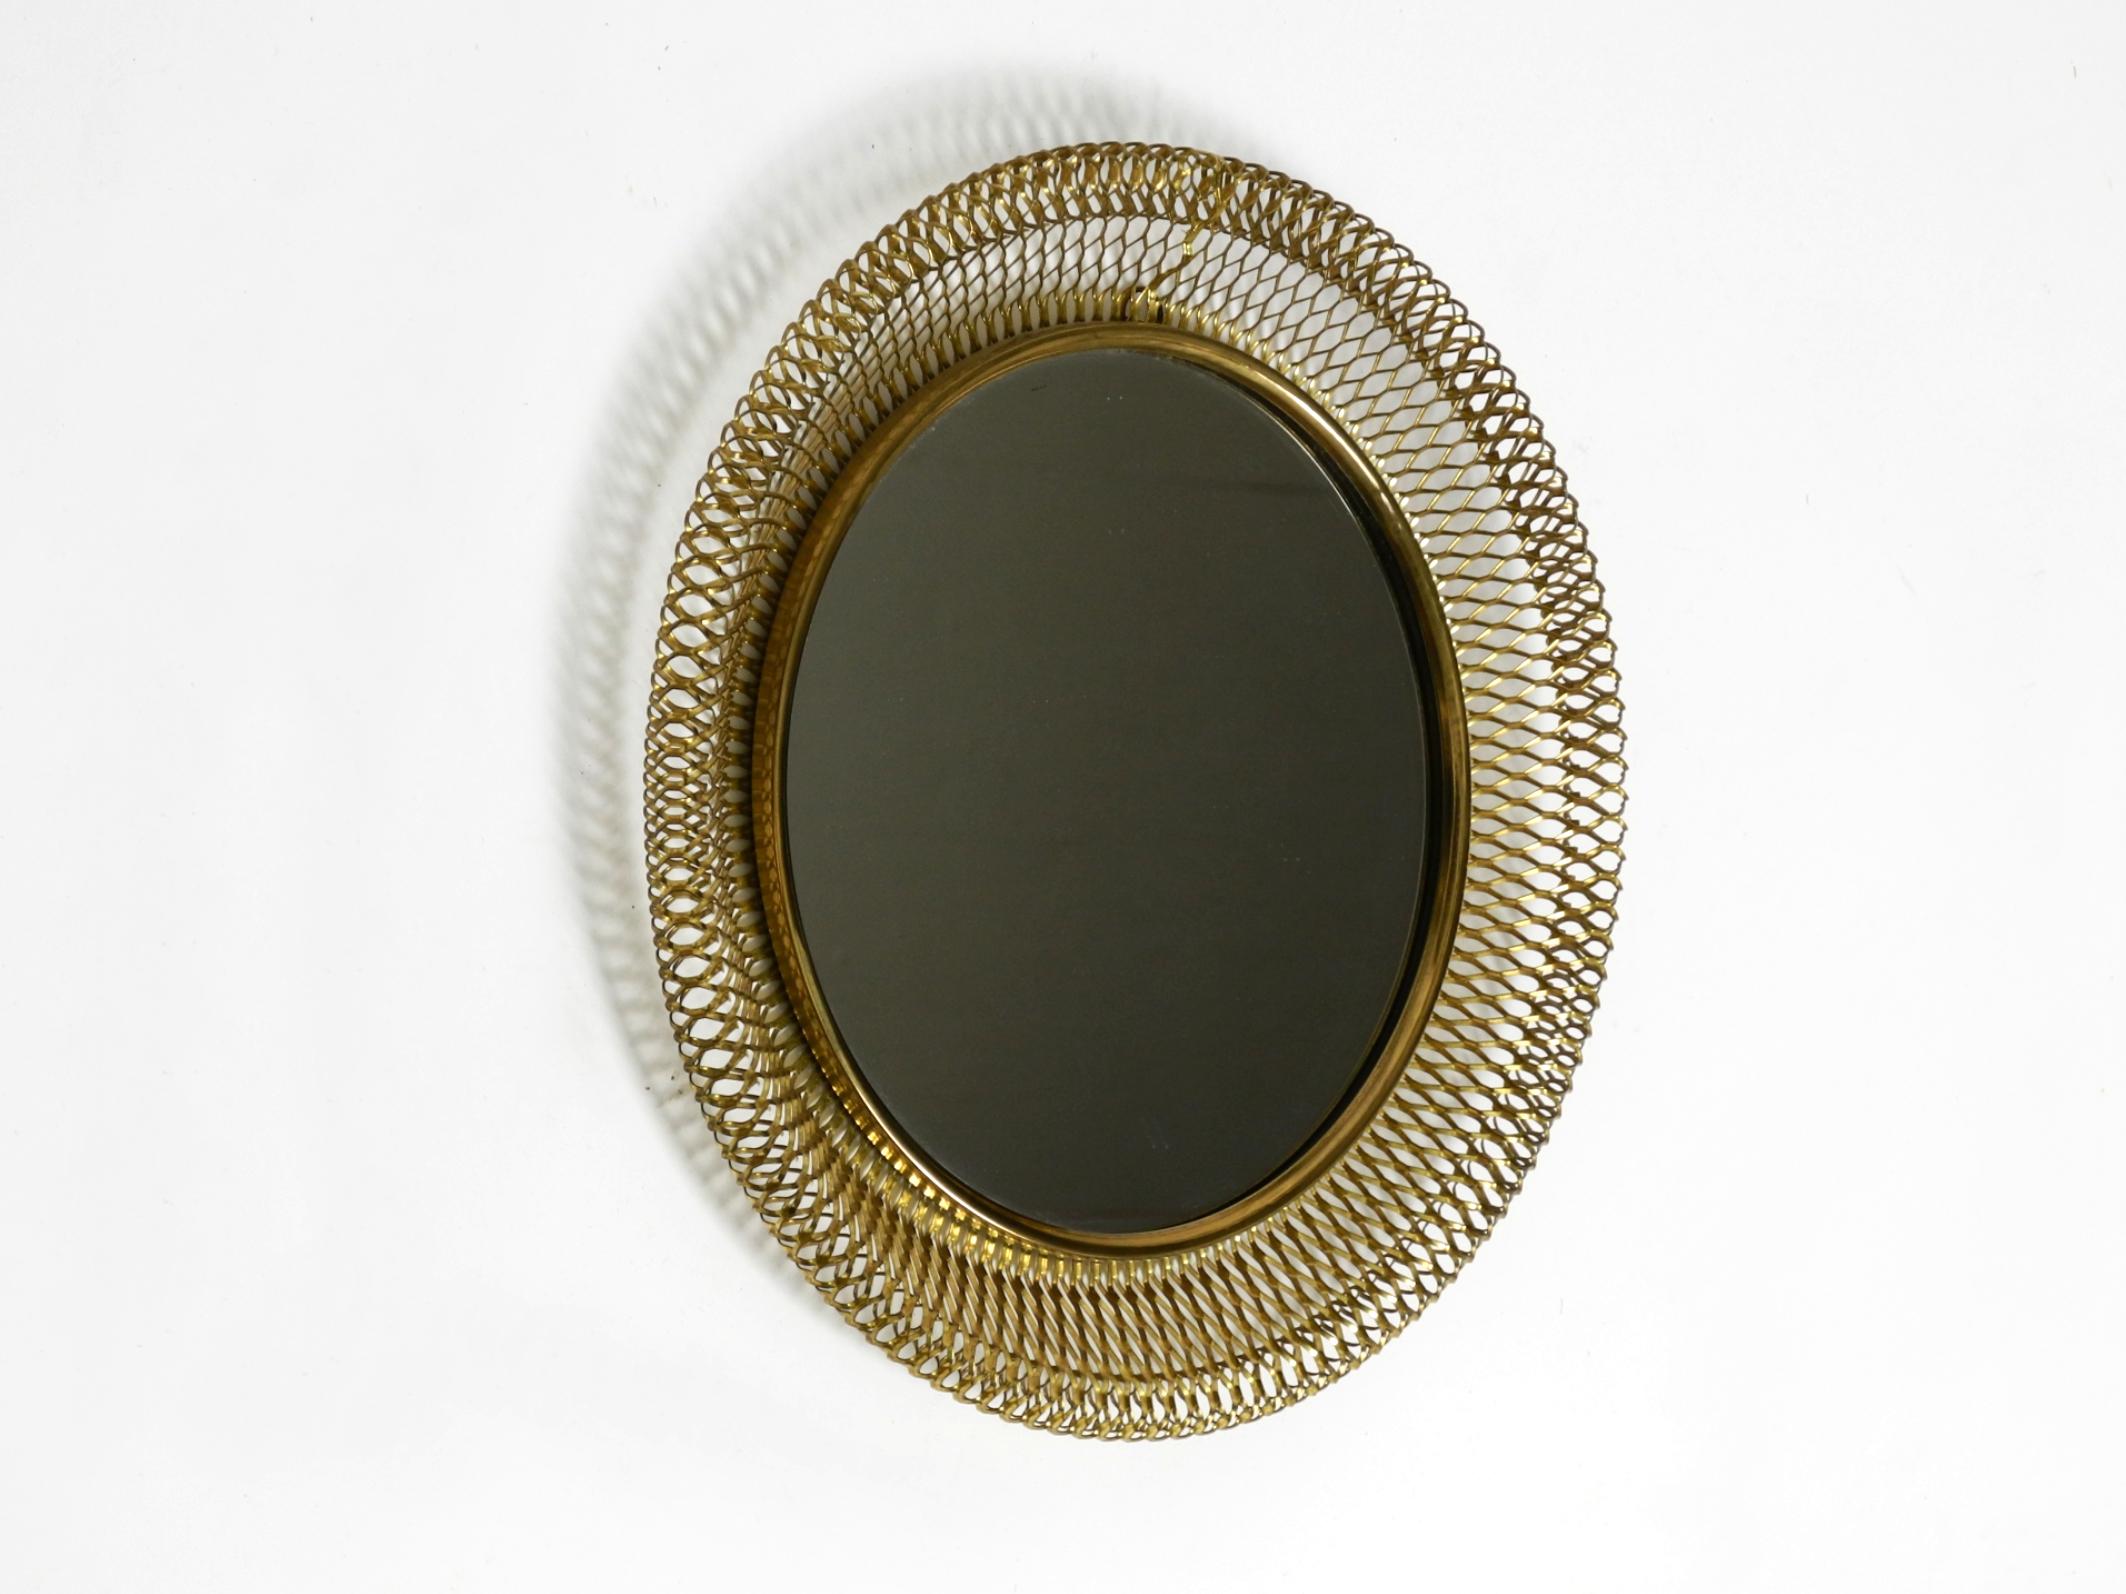 Beautiful round Mid Century Modern wall mirror with expanded brass frame and brass rim.
Stunning 1950s design in very good vintage condition.
Frame and rim are made of brass. The back plate is made of in brass color painted metal.
Mirror is not